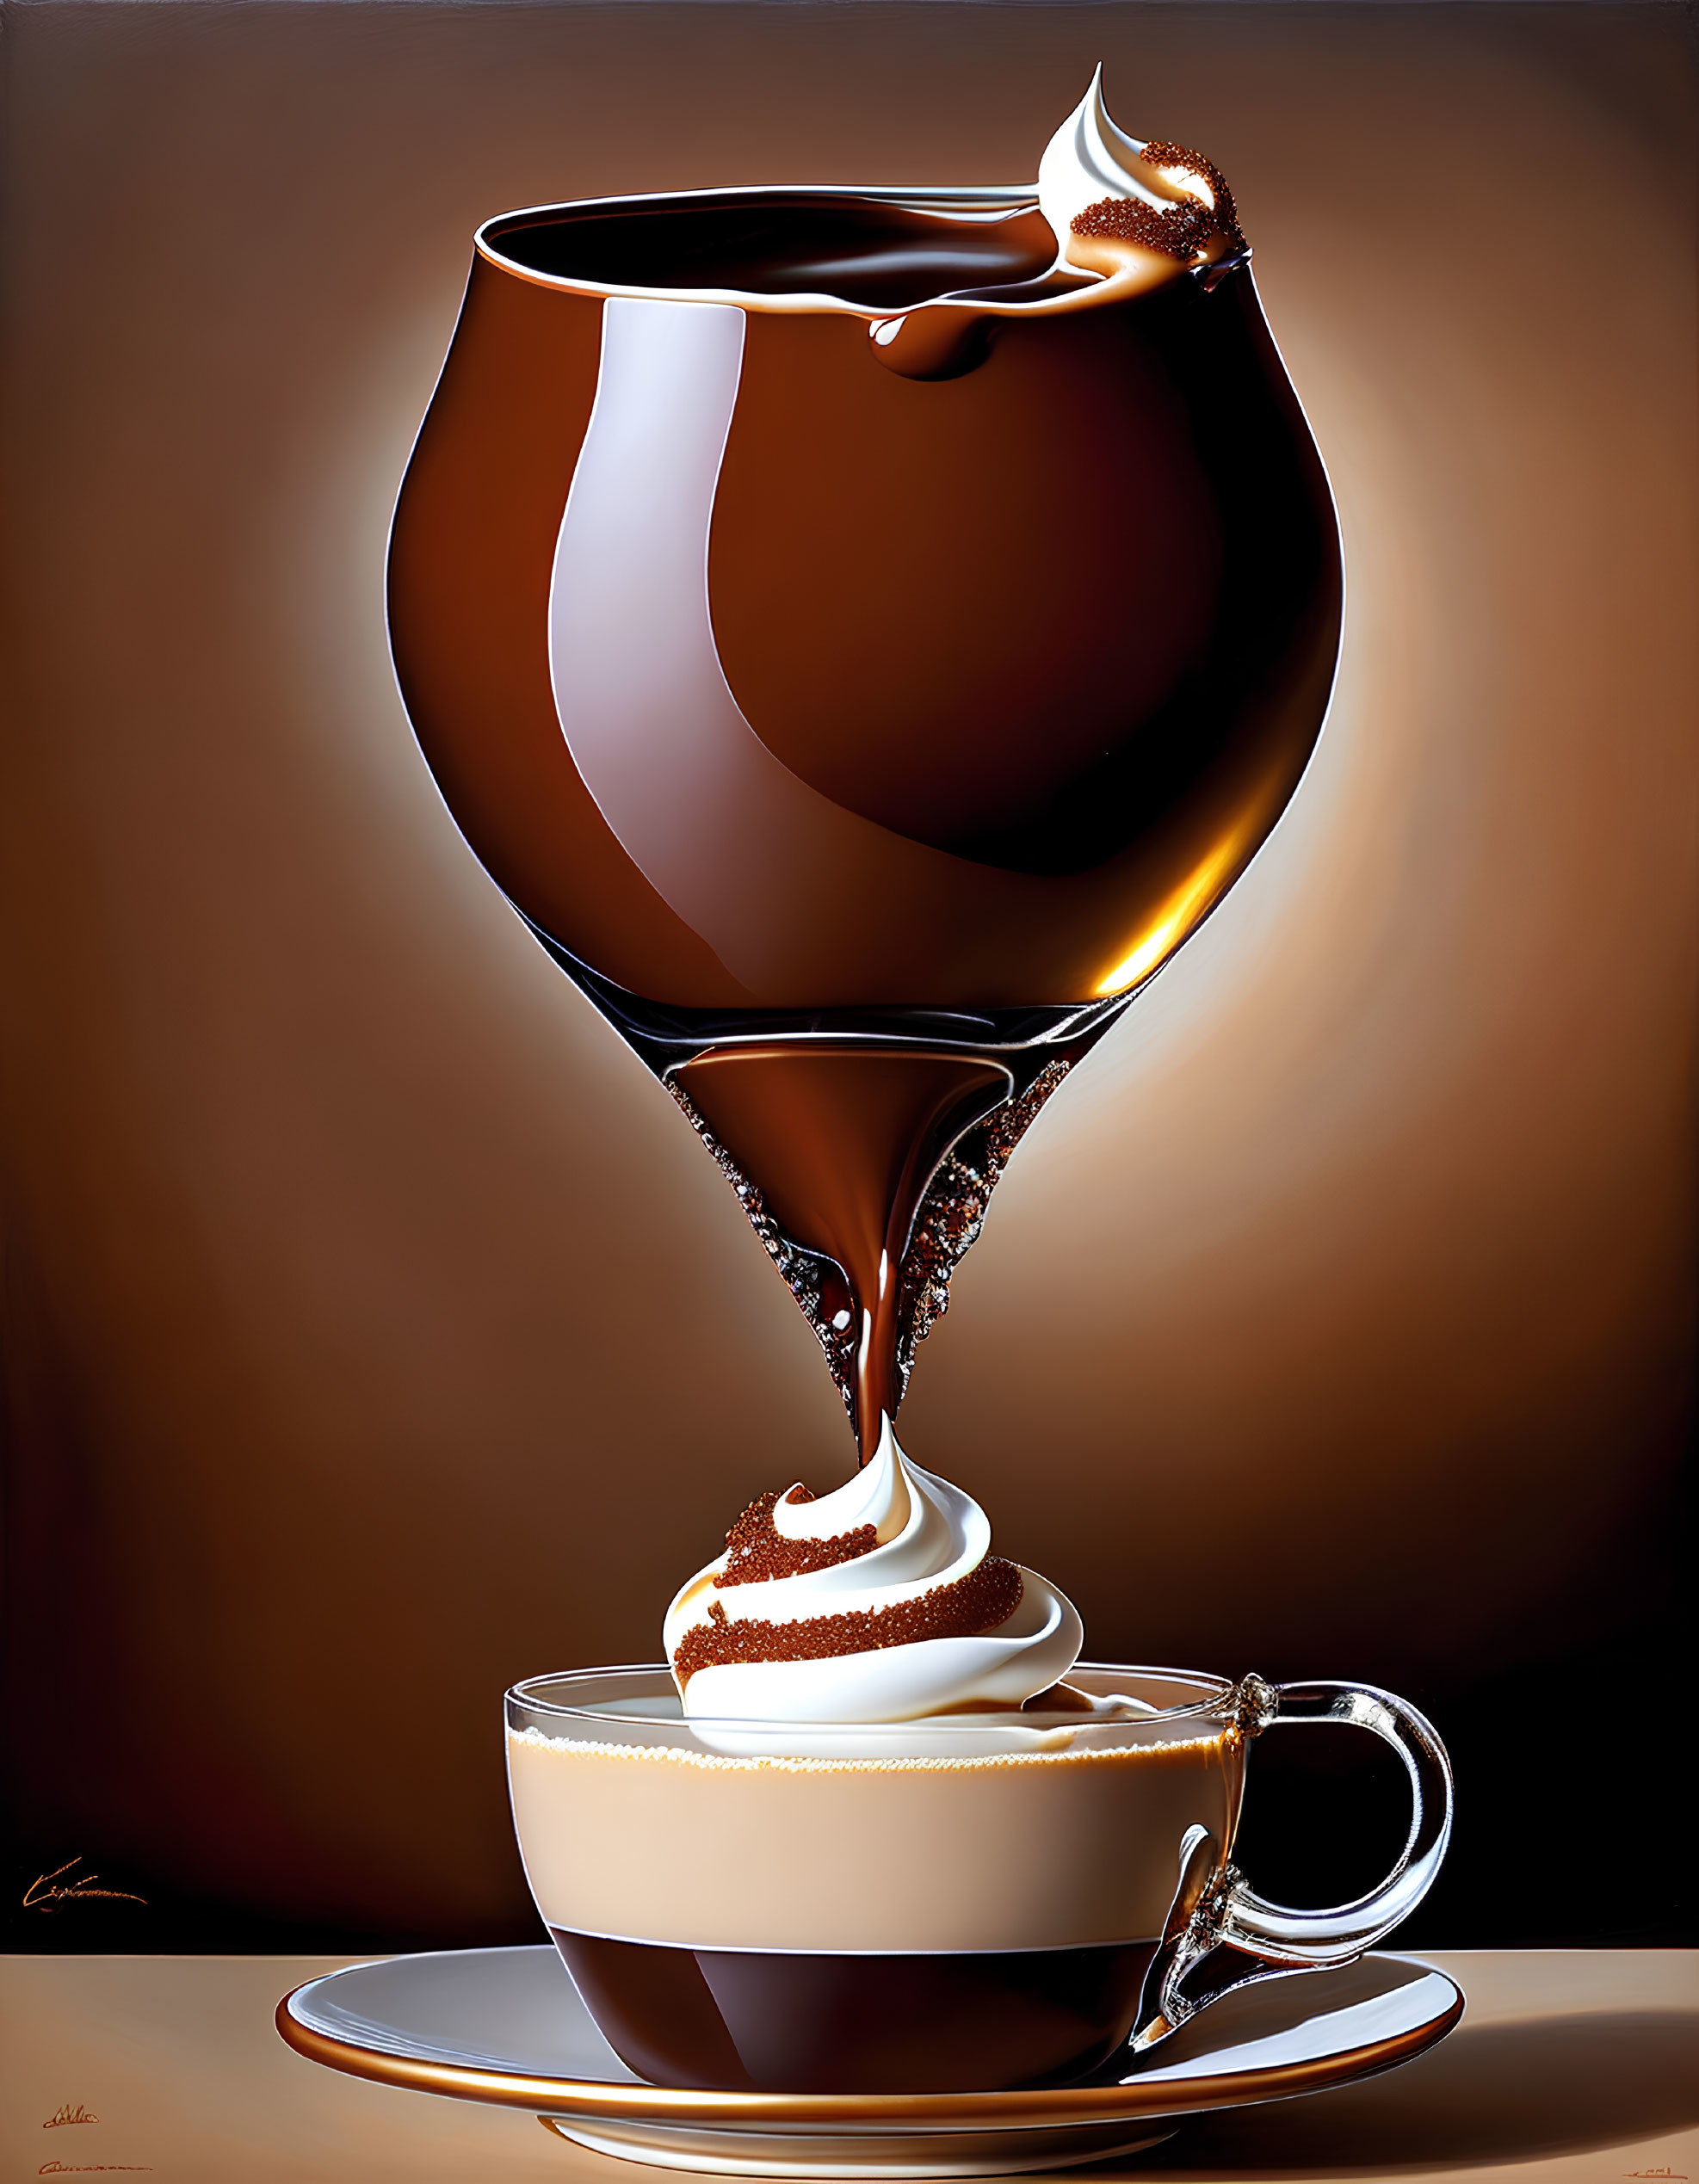 Stylized image: Glass of chocolate spills into smaller cup with cream